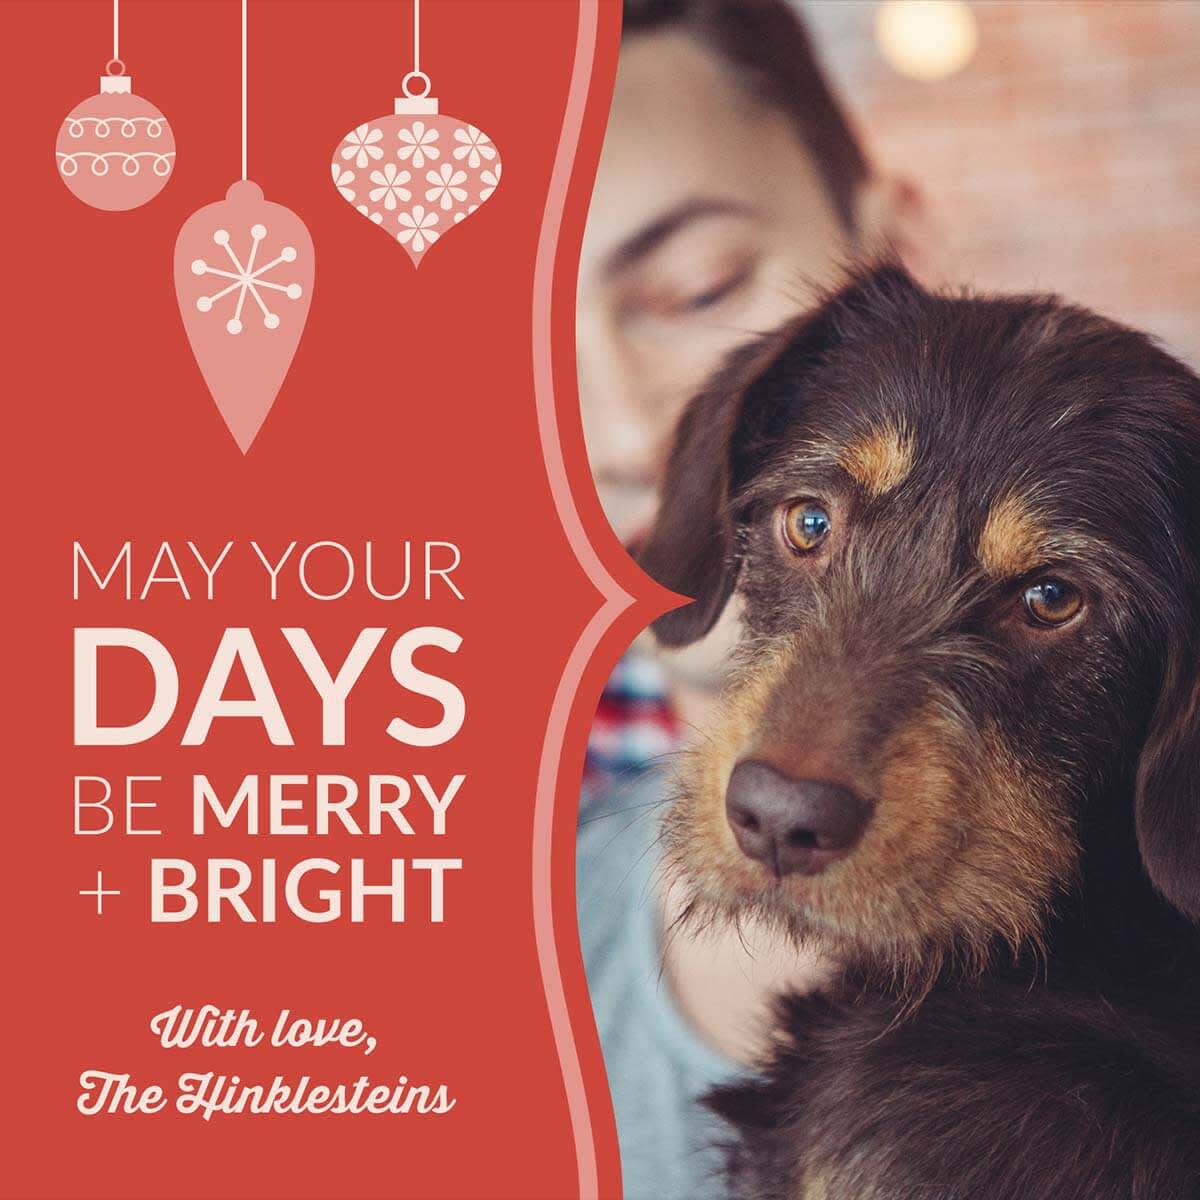 Holiday e-card design with photo of man and his dog, along with text "May your days be merry and bright; With love, The Hinklesteins."